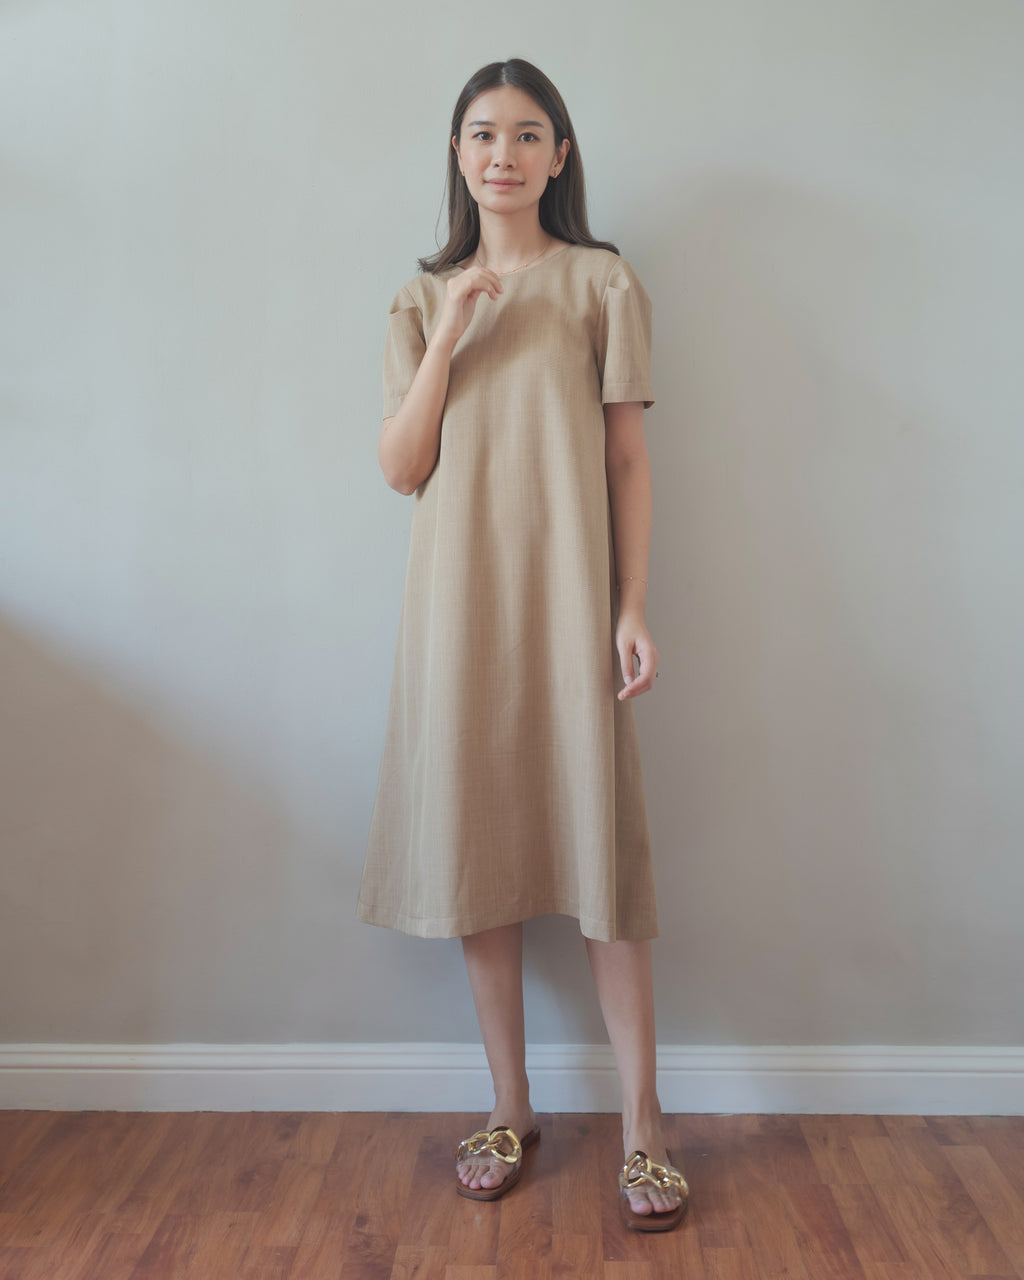 Everyday Dress in Saddle Brown